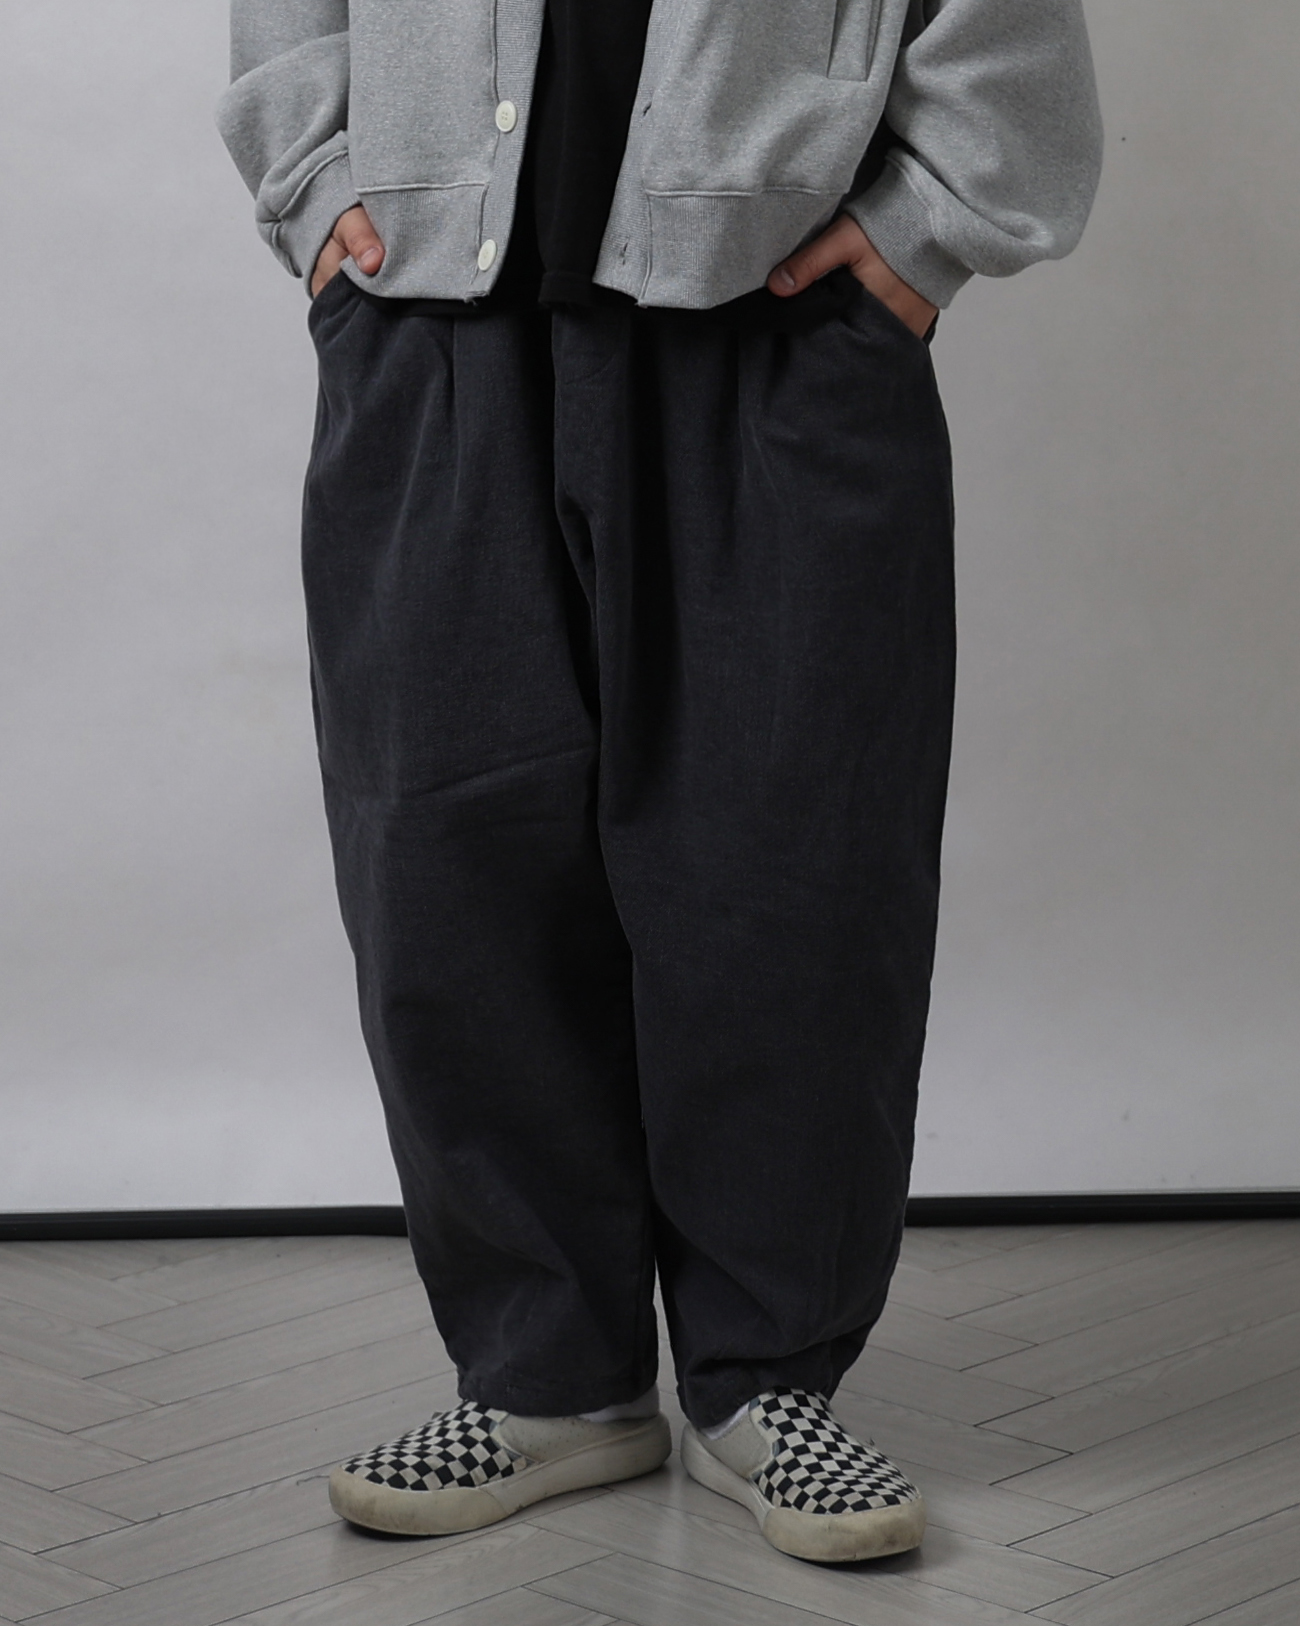 RAM FORE Peach Napped Balloon Pants (Black/Charcoal/Beige)